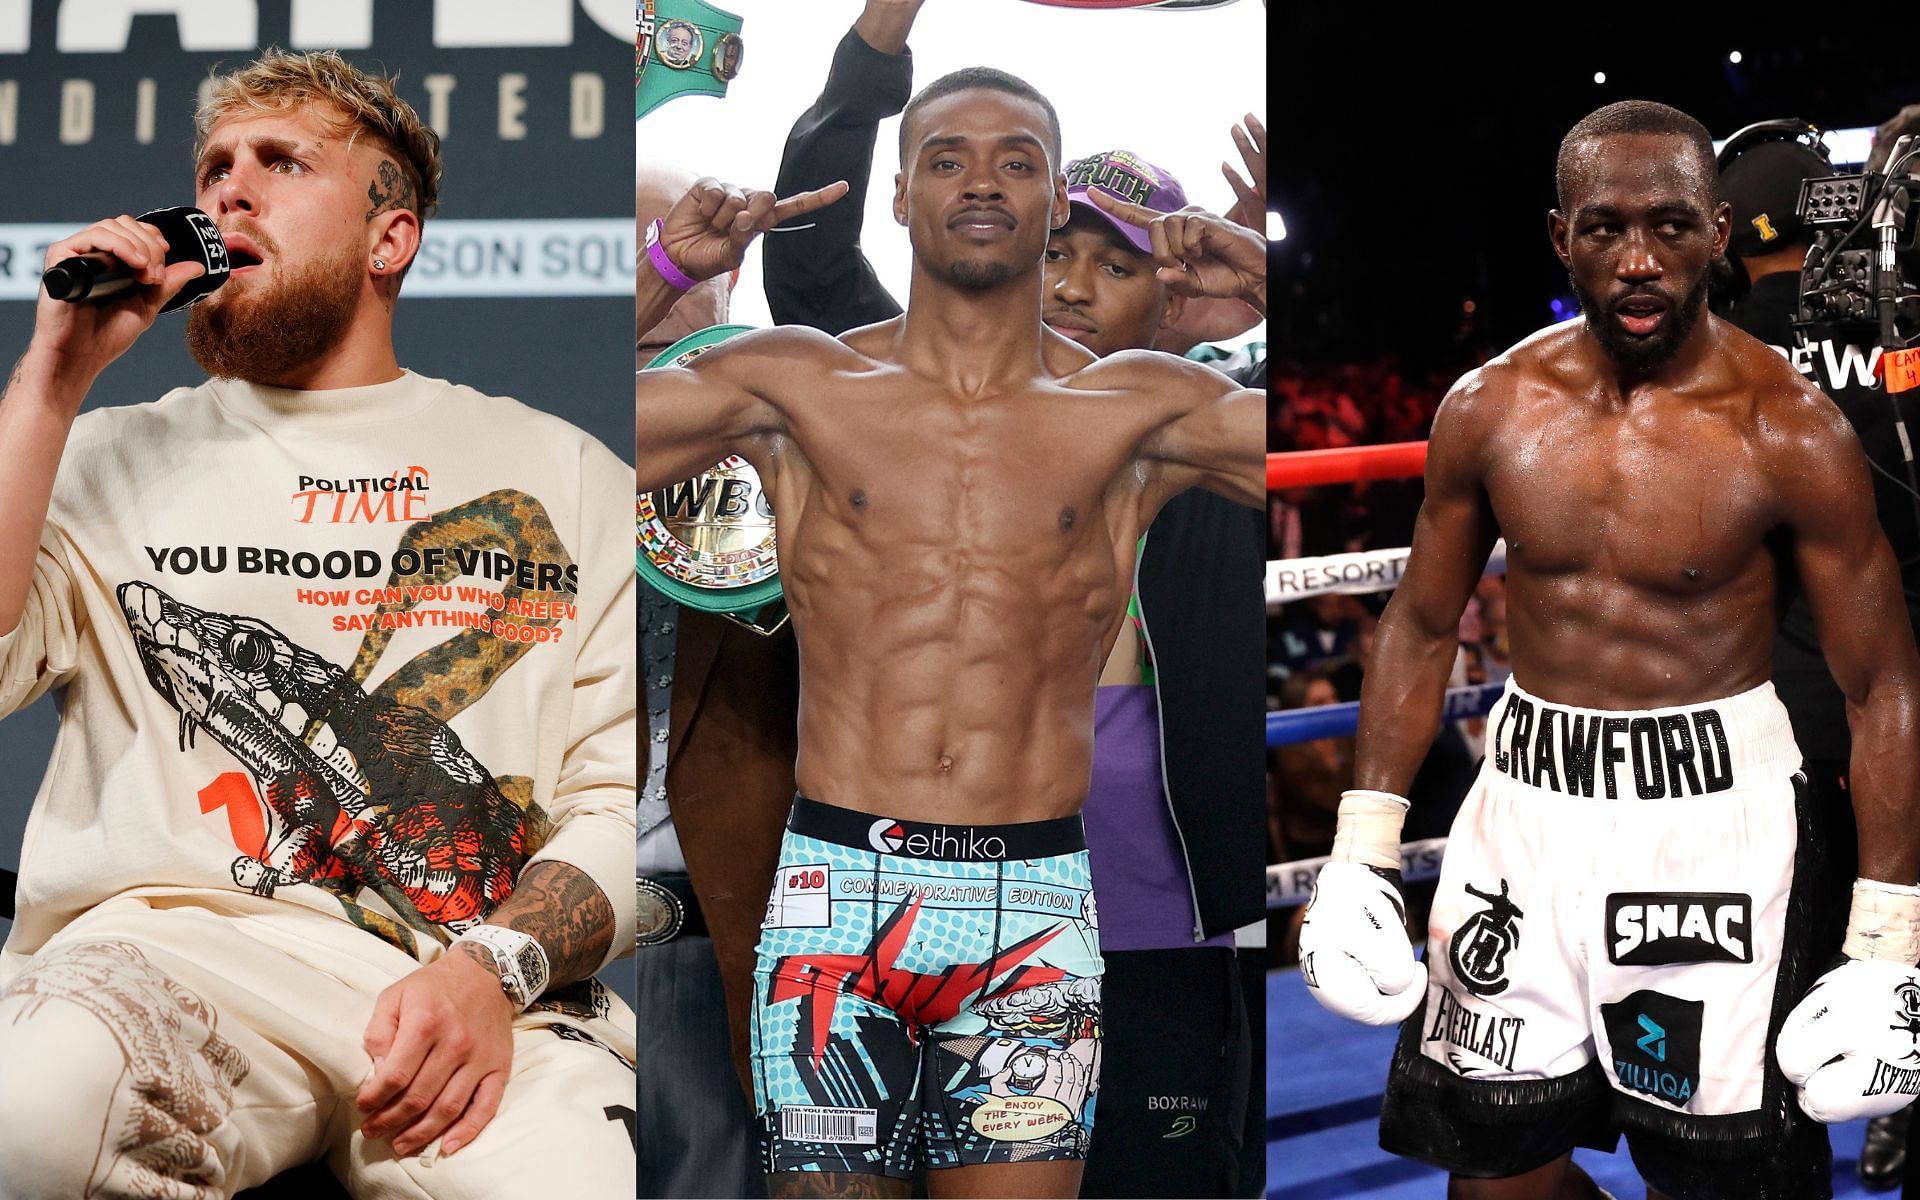 Jake Paul (left), Errol Spence Jr. (center), and Terence Crawford (right) (Image credits Getty Images)